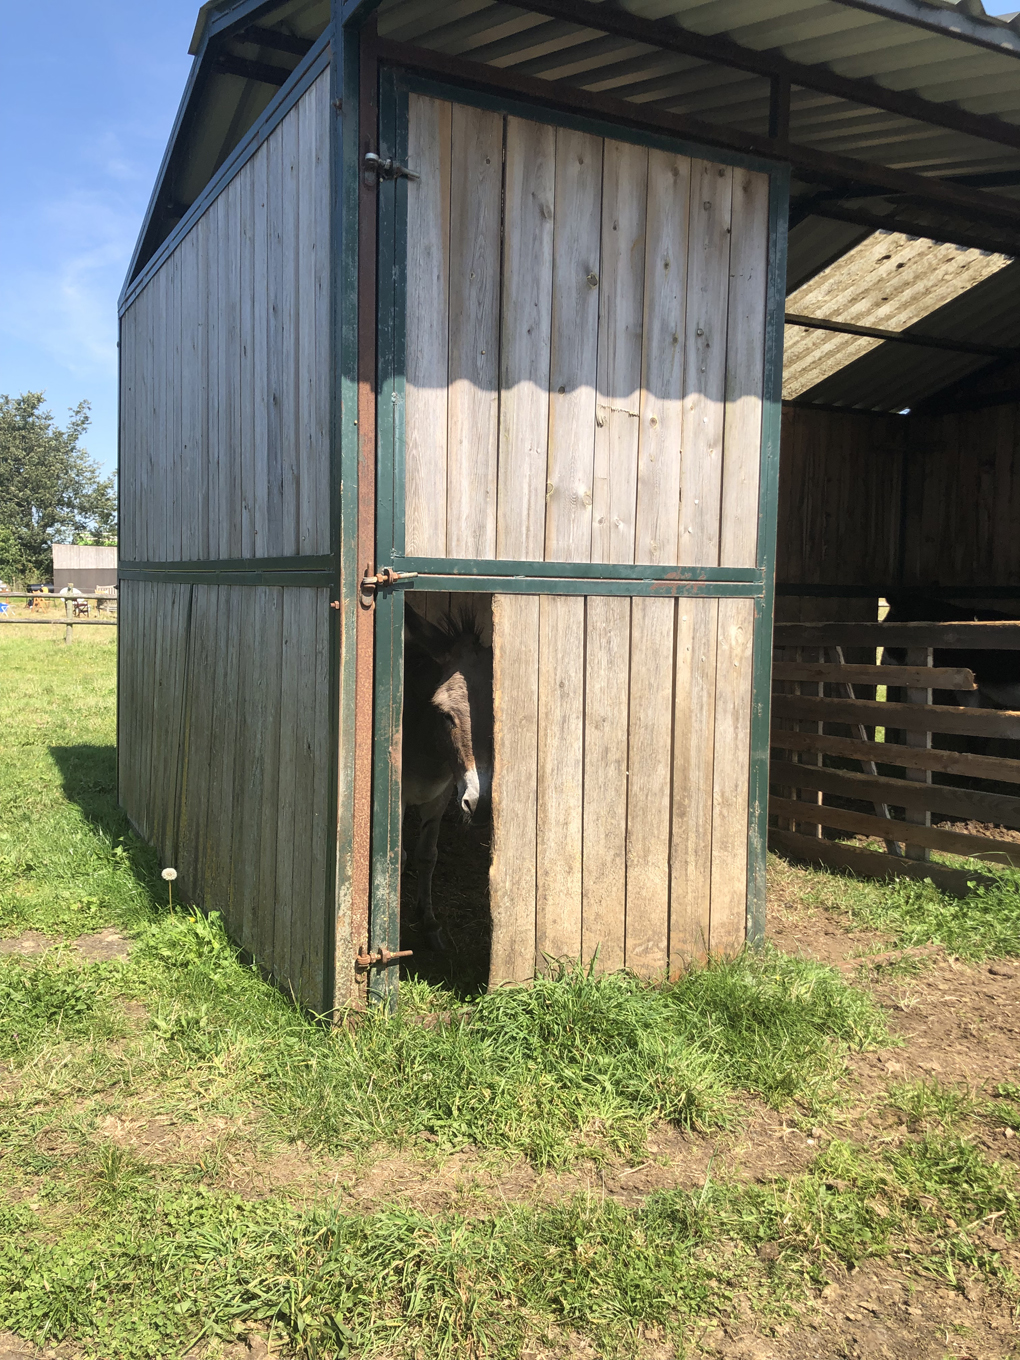 A donkey peering out from inside a shed